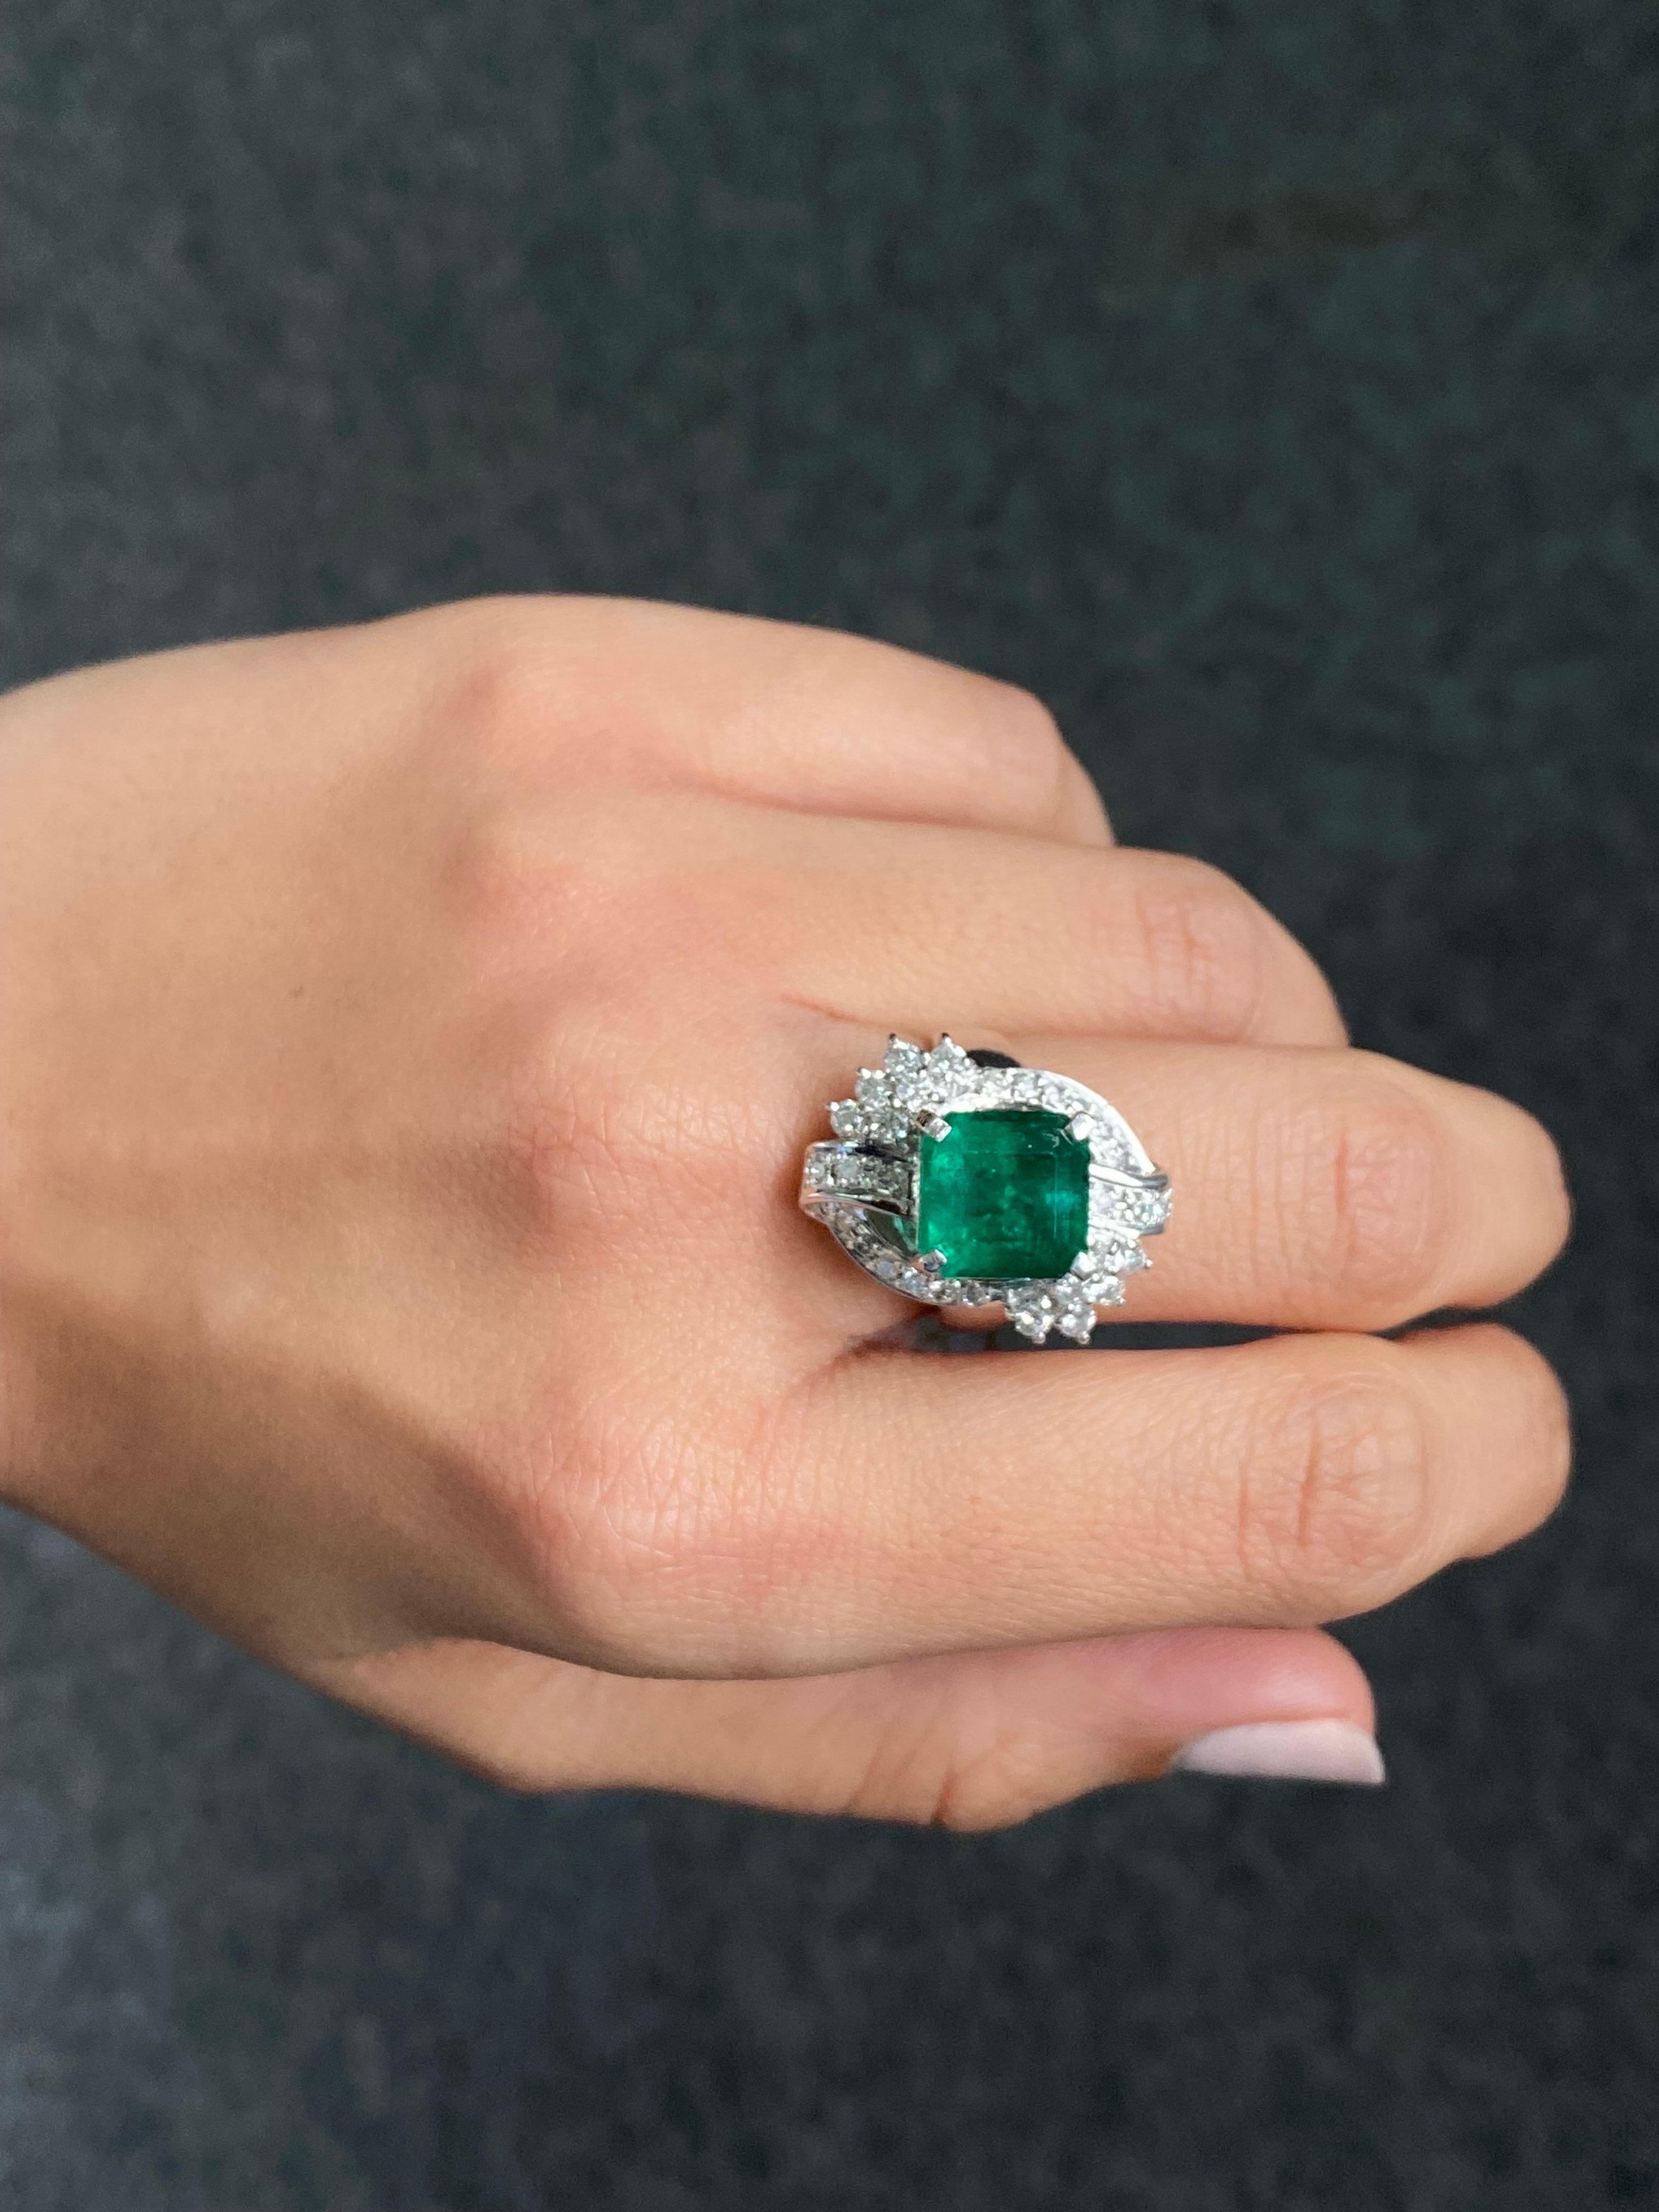 A statement cocktail ring, with a 5.13 carat Zambian Emerald center stone, and 0.75 carat White Diamond all set in Platinum. The center stone is transparent, with a few naturally occurring inclusions - the stone has an ideal vivid green color, and